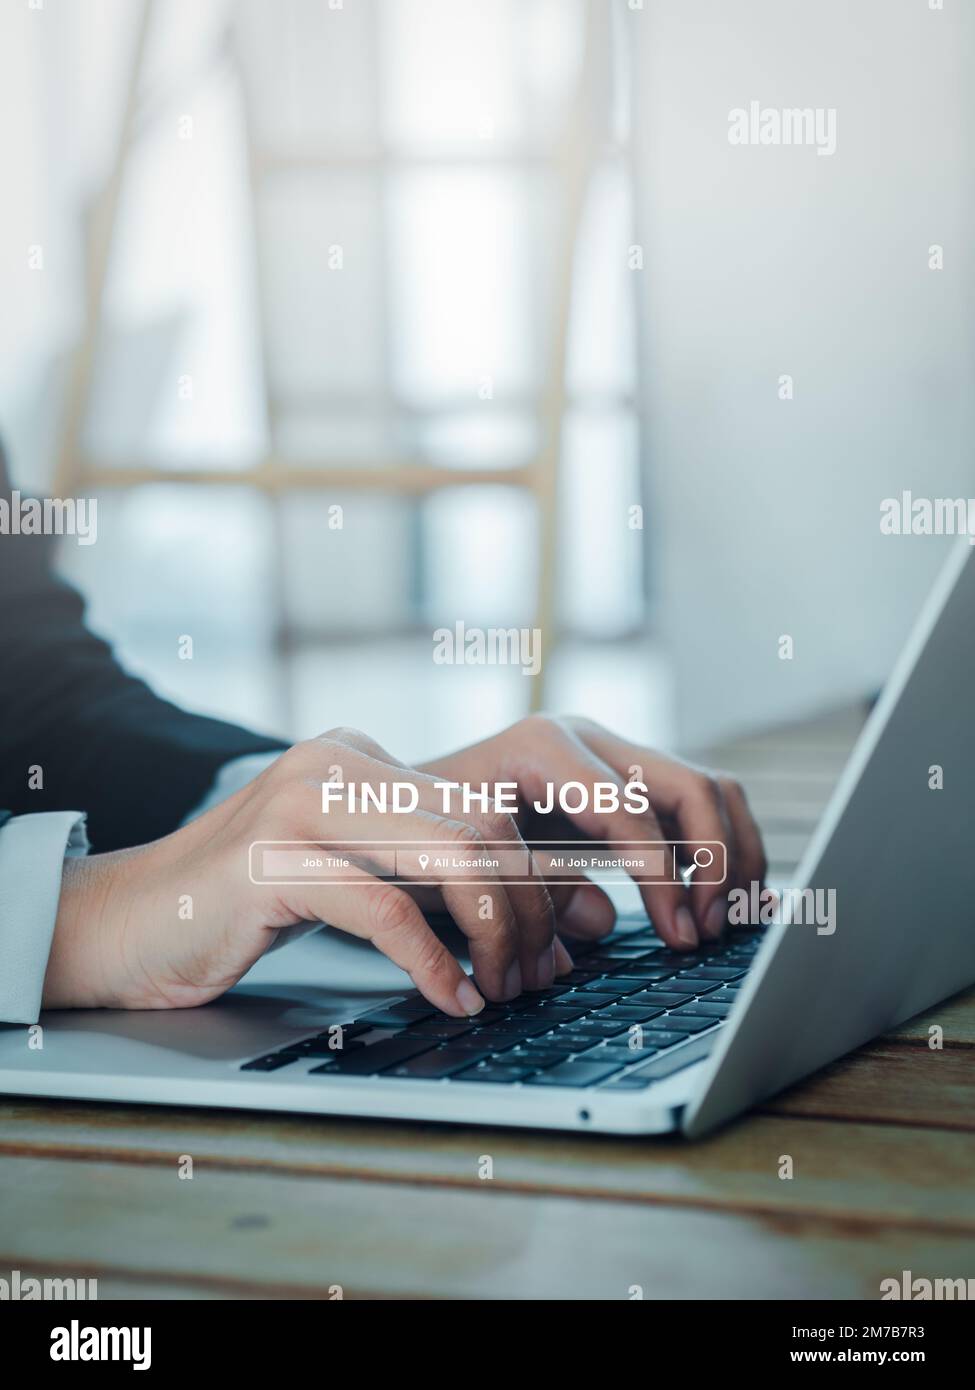 Job or career search, employment, seek for vacancy or work position concept, Find the job, text with searching bar appear while business people using Stock Photo